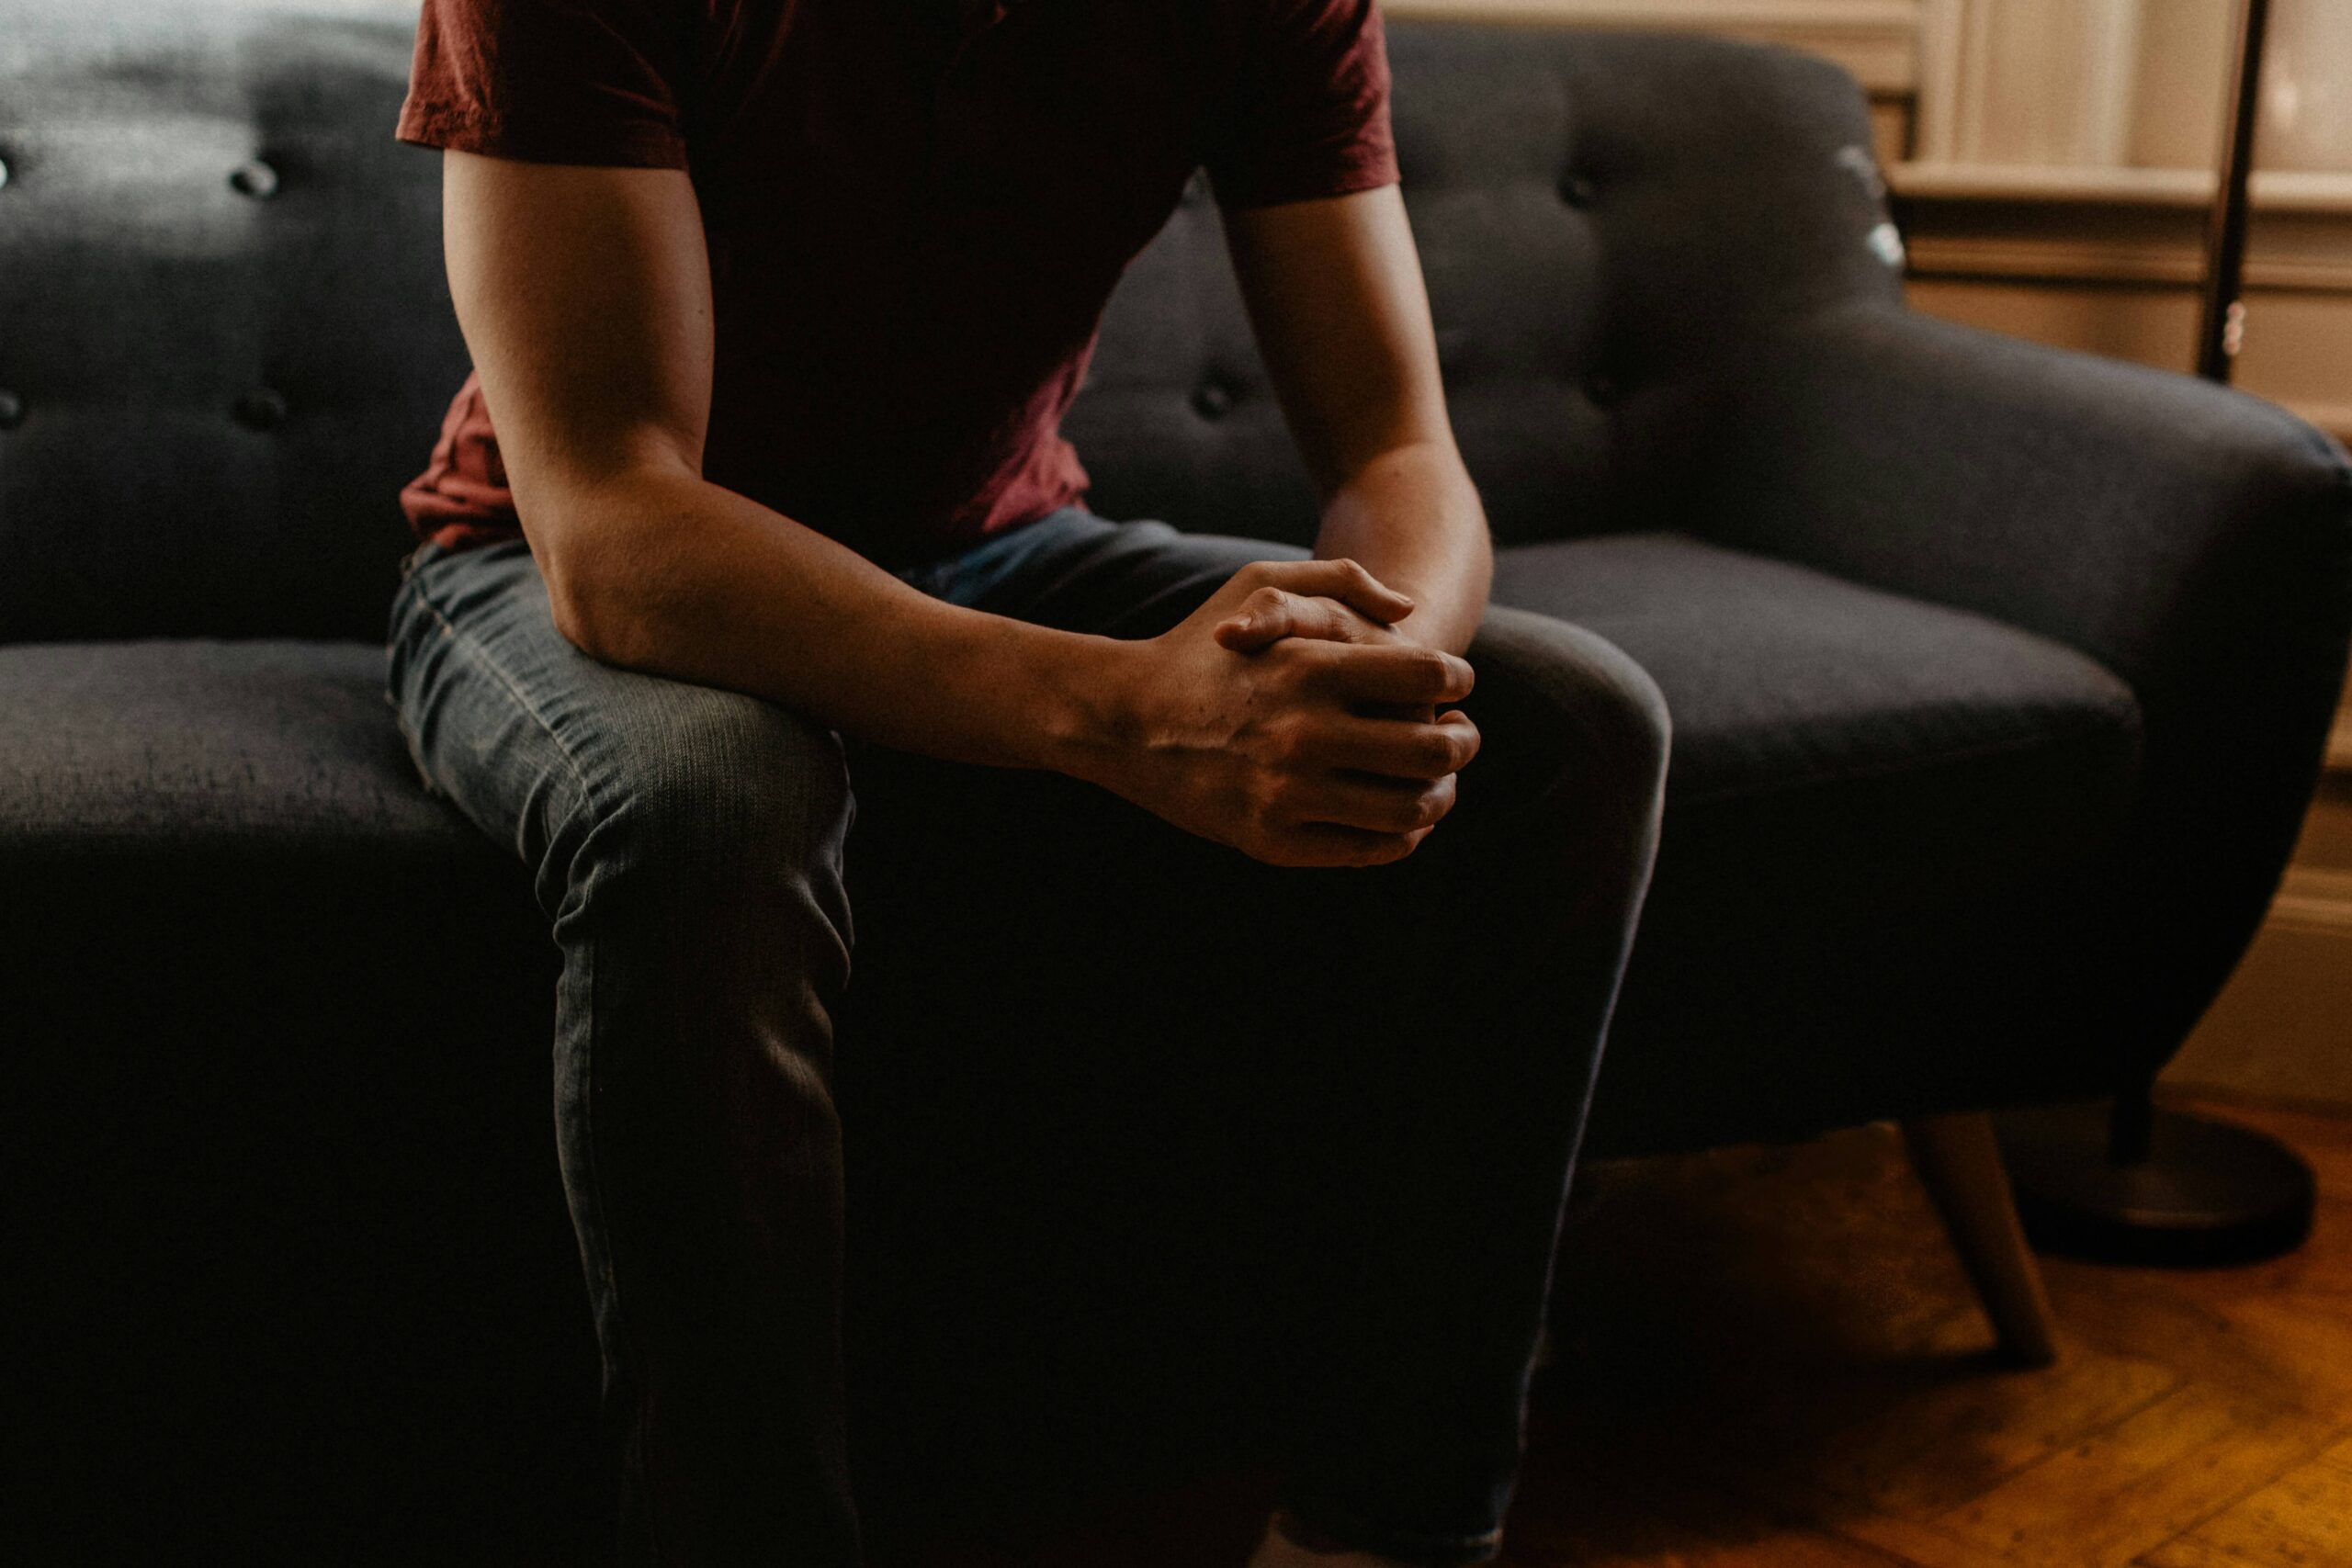 Image of a man sitting on a couch in a dark room, with his hands clasped together. discover how a compassionate grief counselor in Saint Petersburg, FL can help you adjust to the loss of someone.